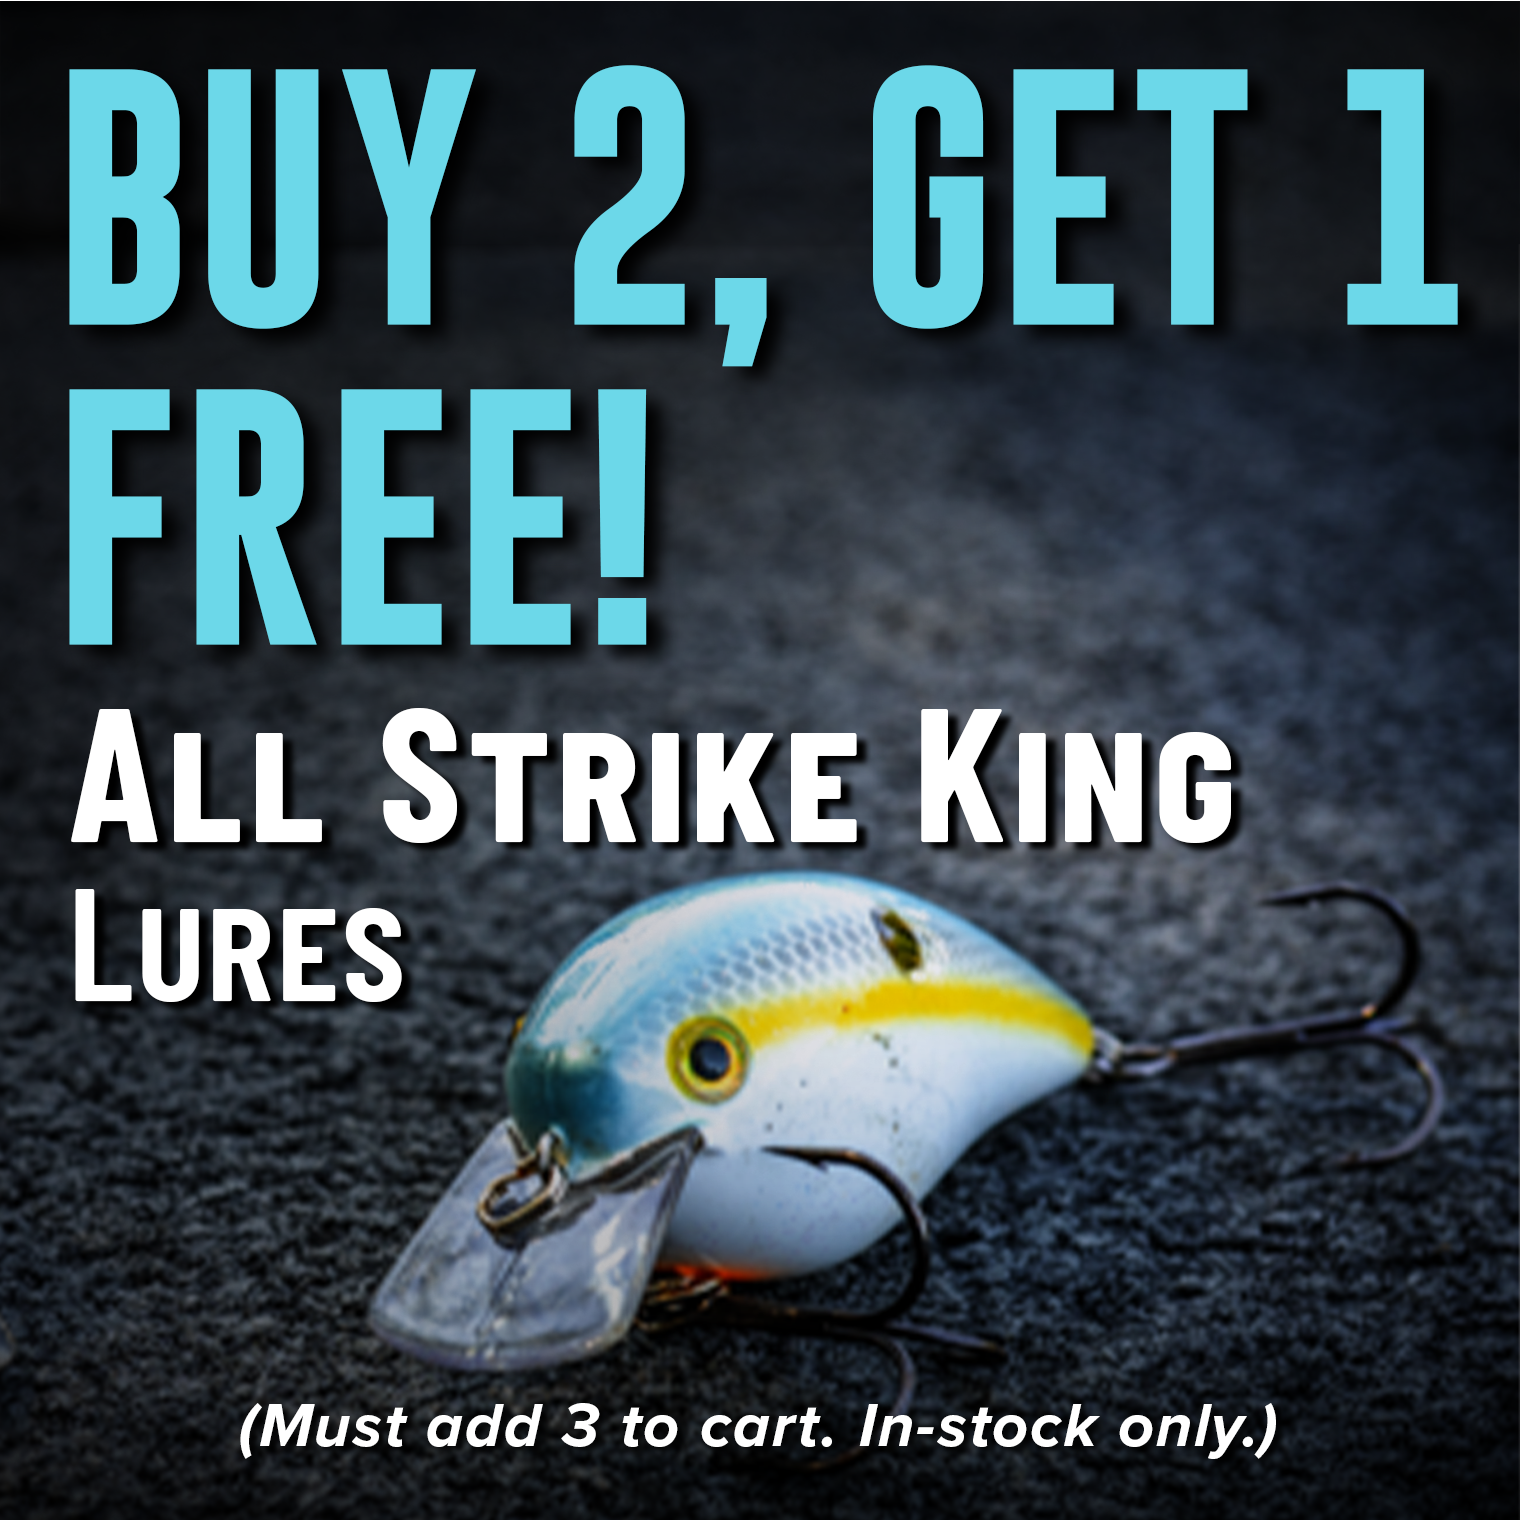 Buy 2, Get 1 Free! All Strike King Lures (Must add 3 to cart. In-stock only.)